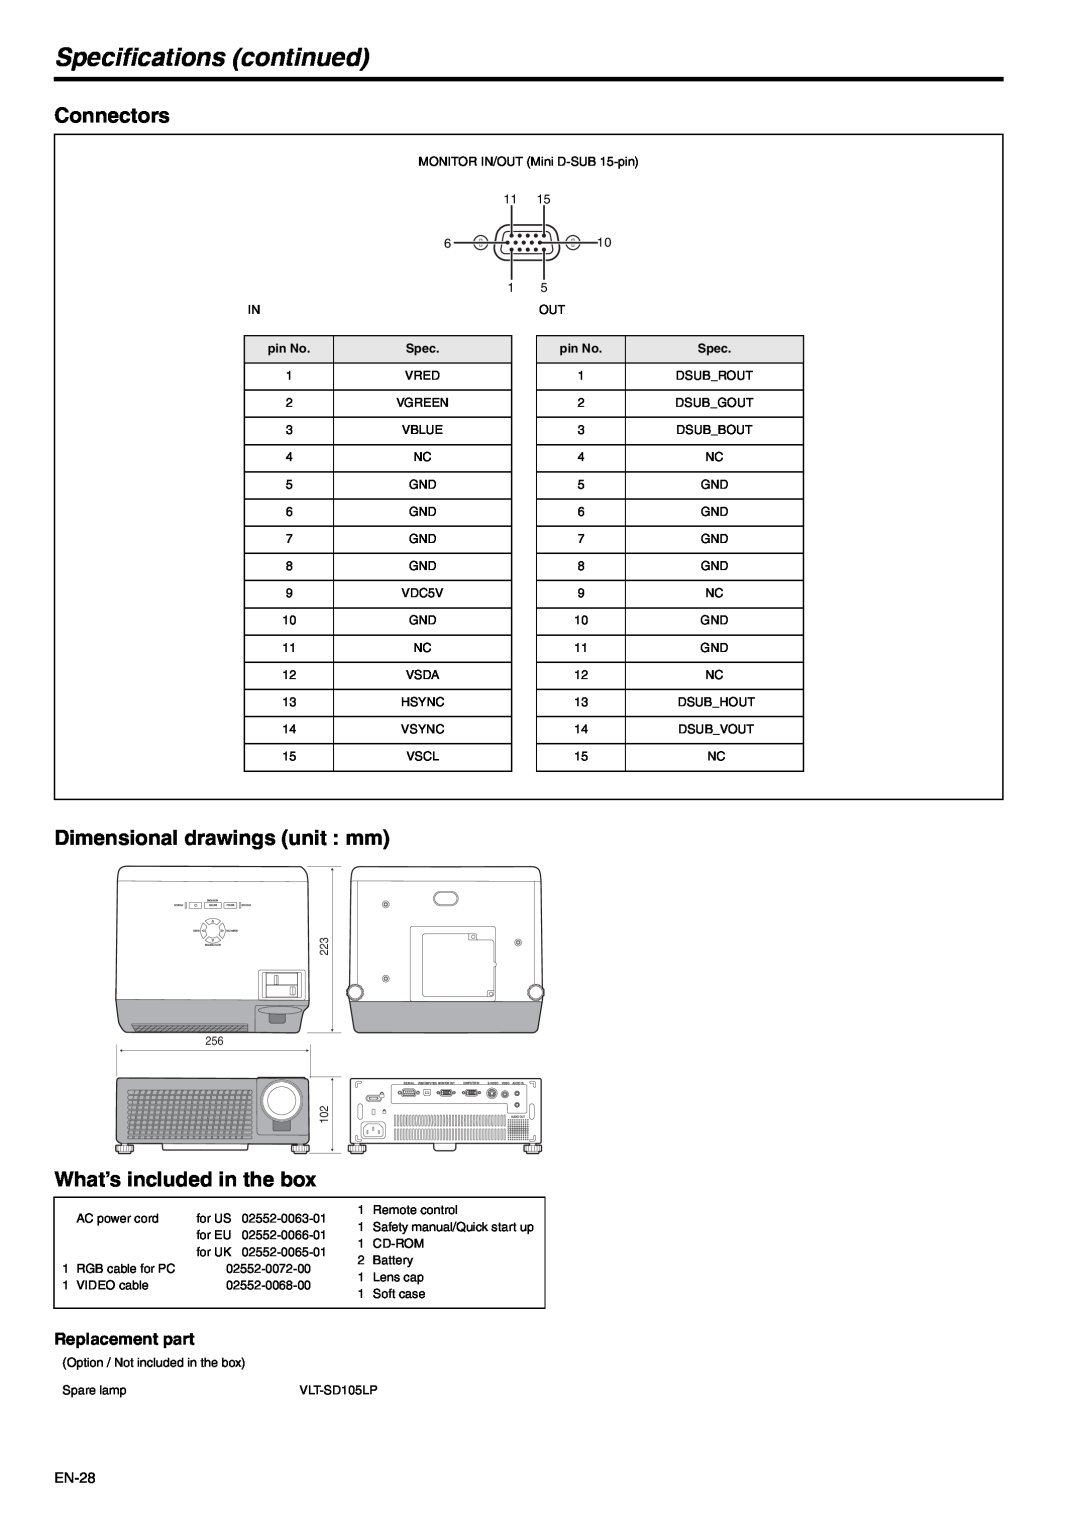 Mitsubishi Electronics SD105U Specifications continued, Connectors, Dimensional drawings unit mm, Replacement part, pin No 